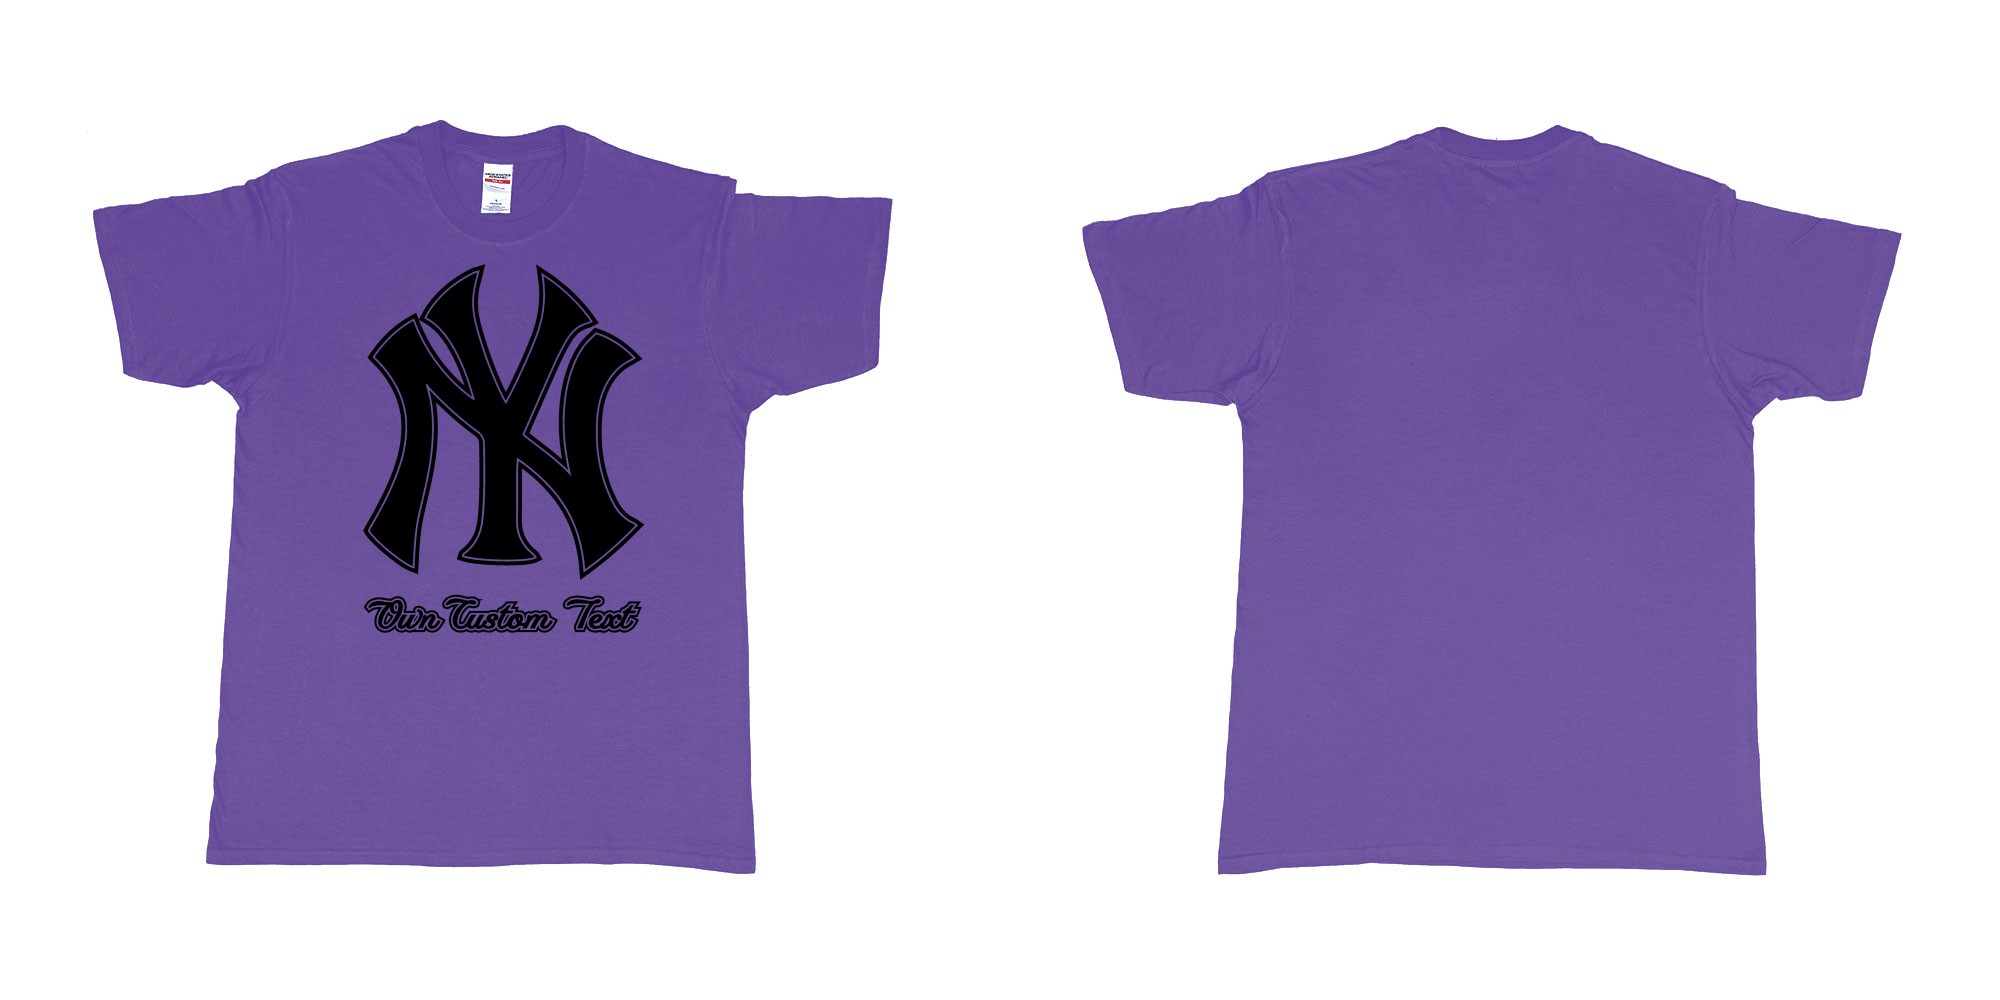 Custom tshirt design new york yankees baseball team custom design in fabric color purple choice your own text made in Bali by The Pirate Way